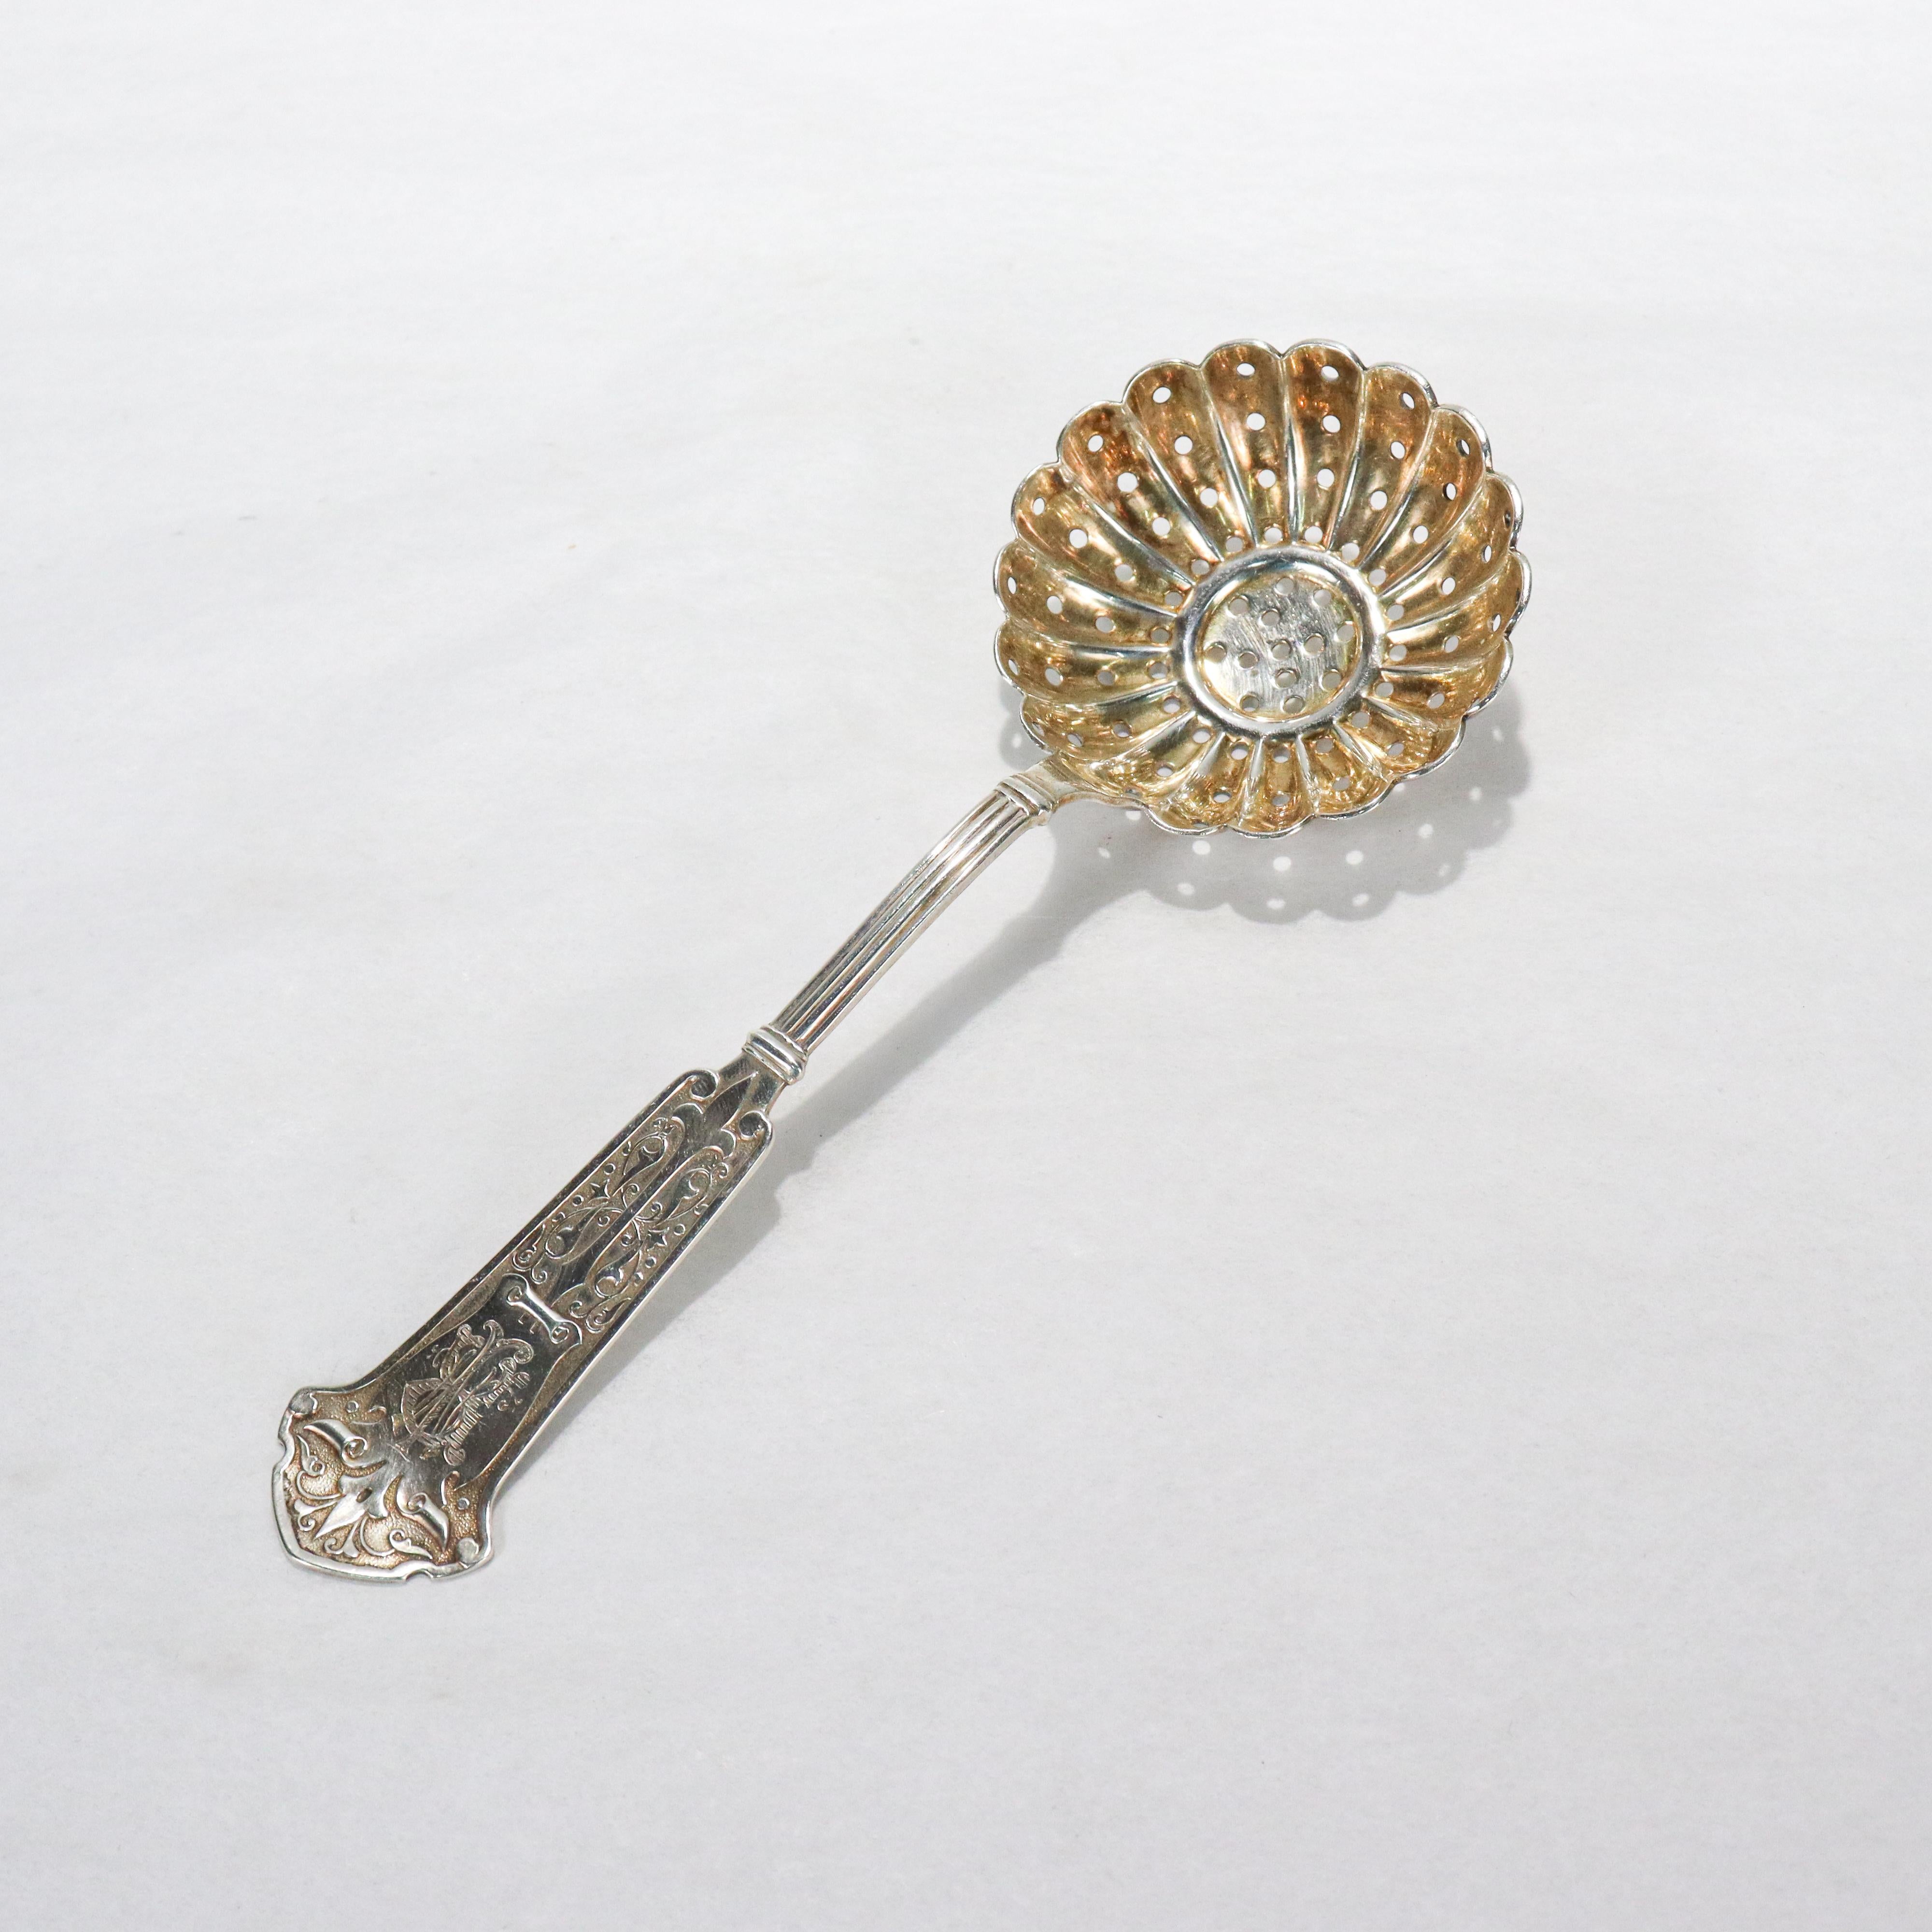 A fine antique silver sugar sifter.

By George Sharp.

In sterling silver with gilding to both the bowl and the handle.

The handle is decorated with an embossed Arabesque pattern.

Simply a great sugar sifter!

Date:
Mid-19th Century

Overall